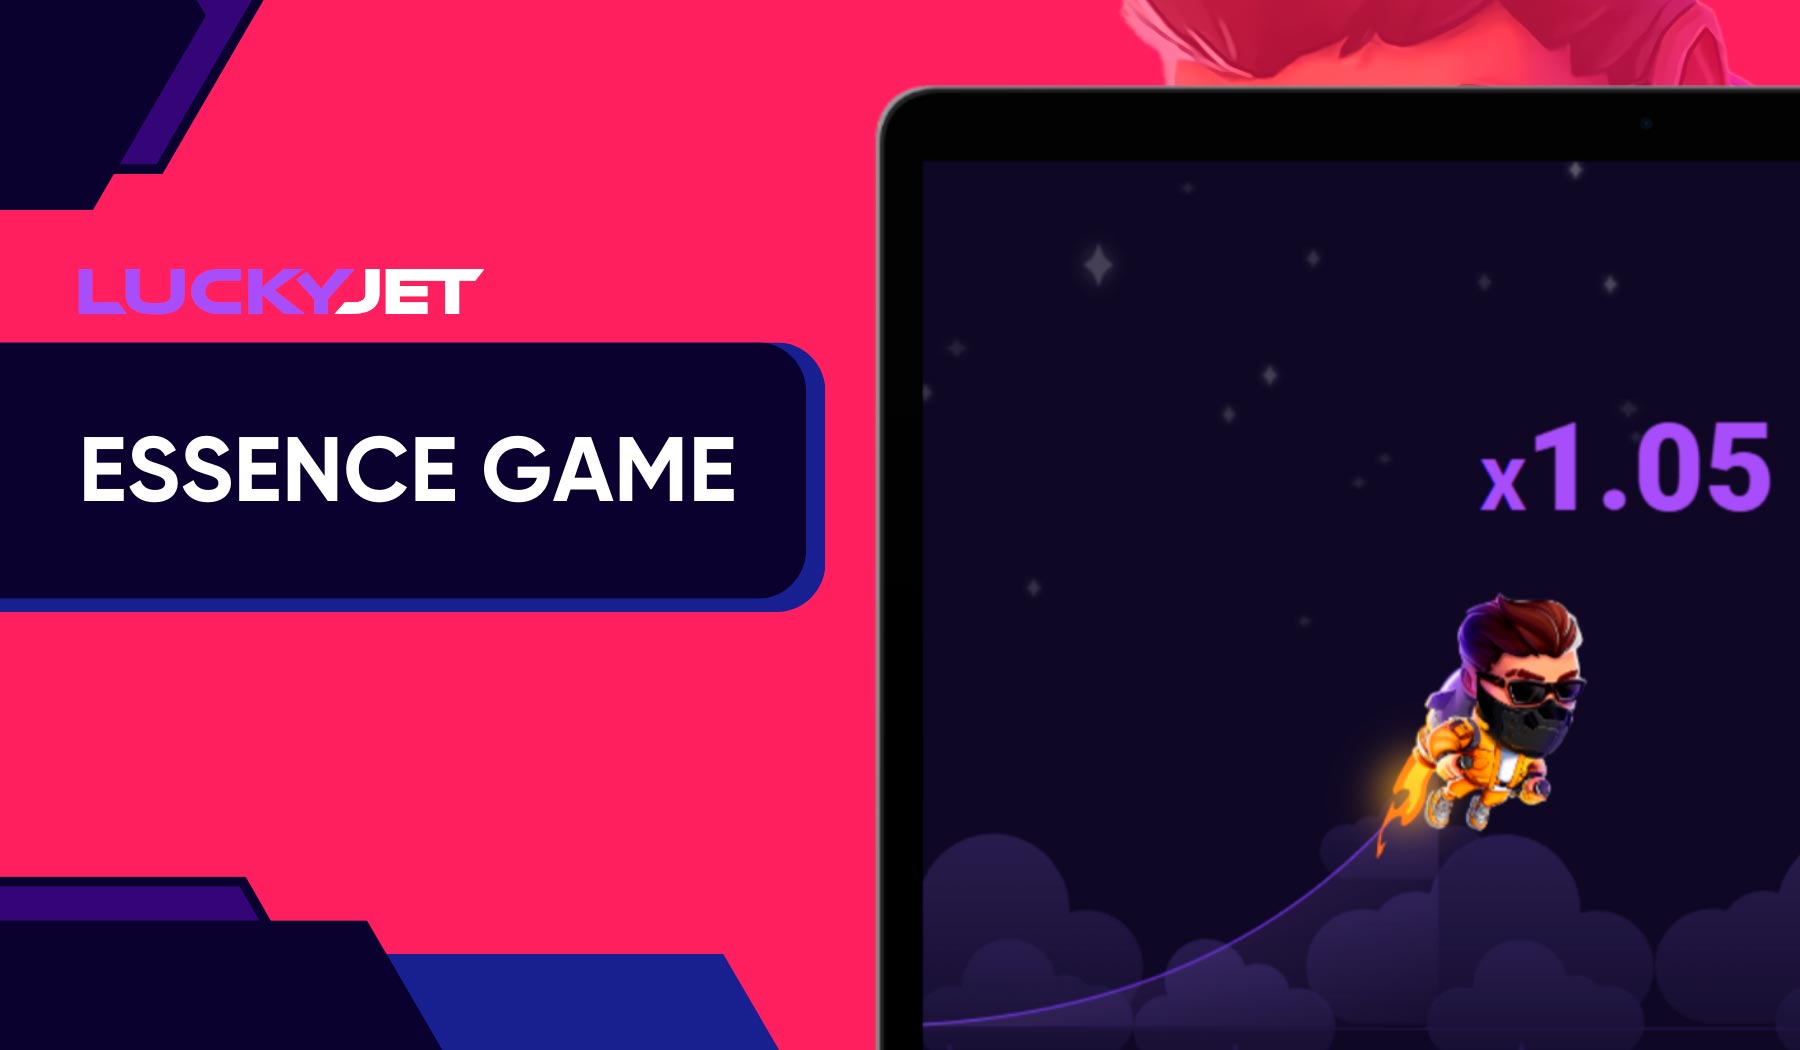 Test Your Luck and Play the Lucky Jet Game